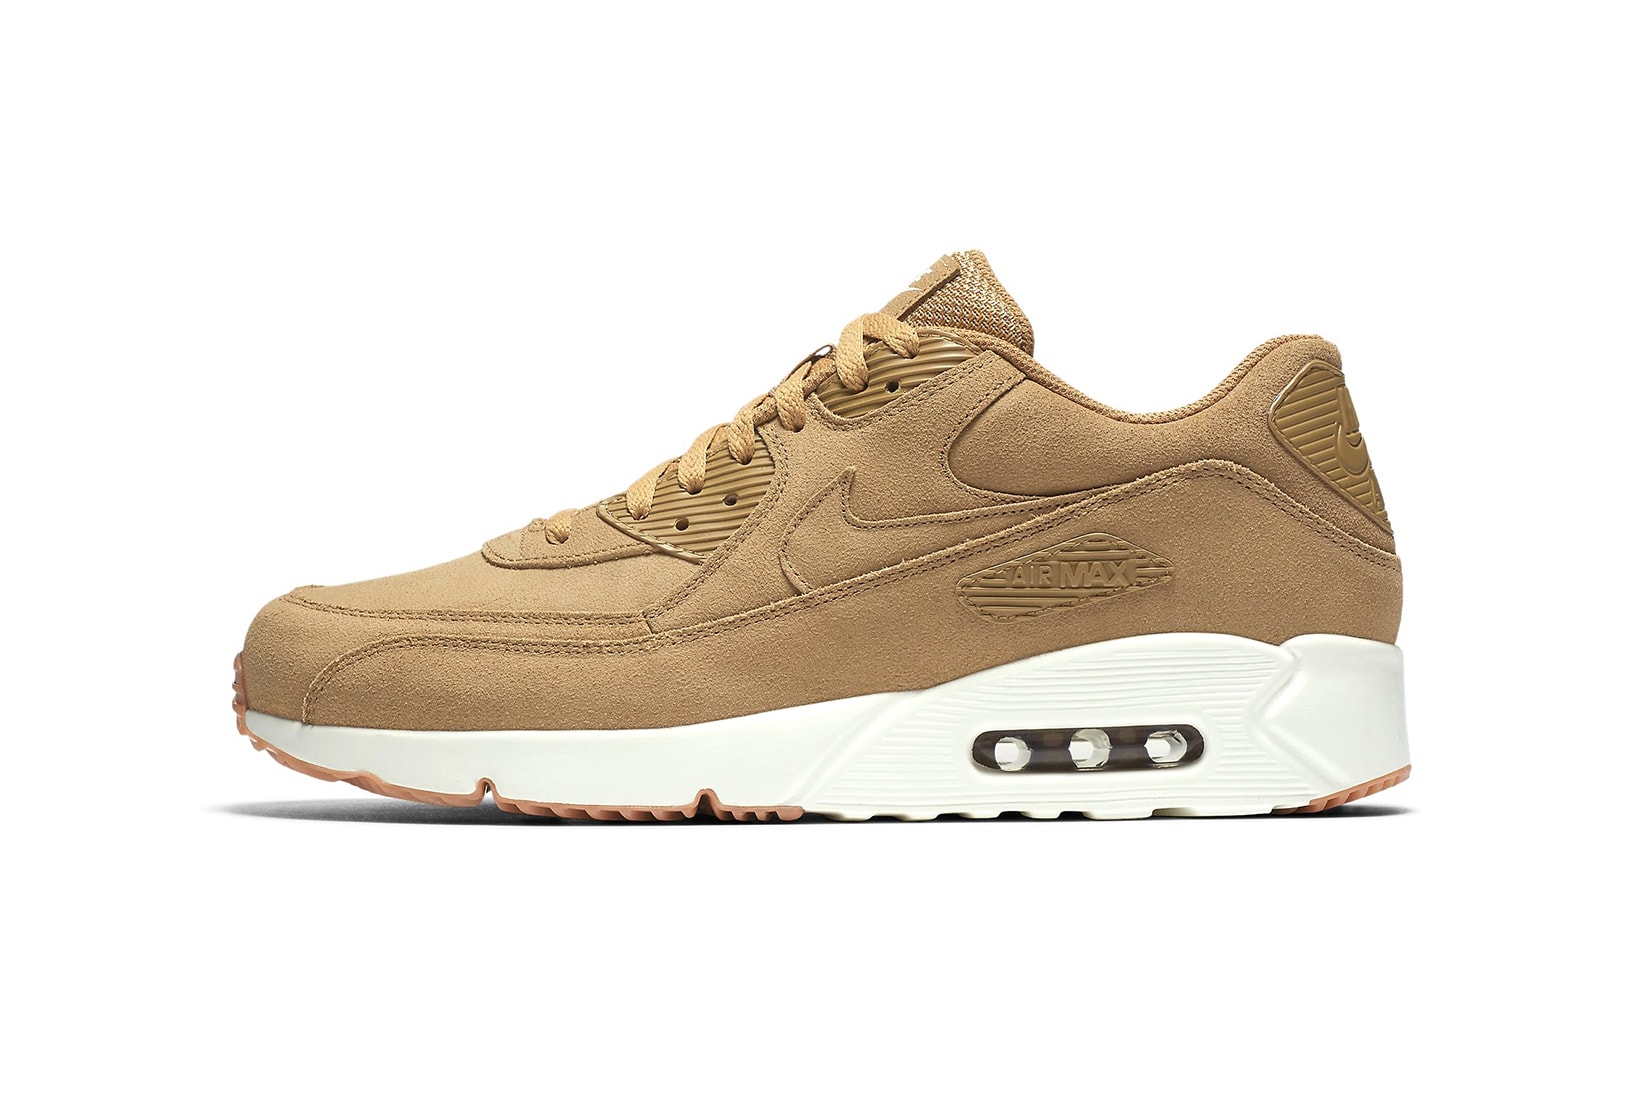 Nike Air Max 90 BW Huarache Footscape Woven Chukka Flax Wheat 2017 October 14 Release Date Info Sneakers Shoes Footwear